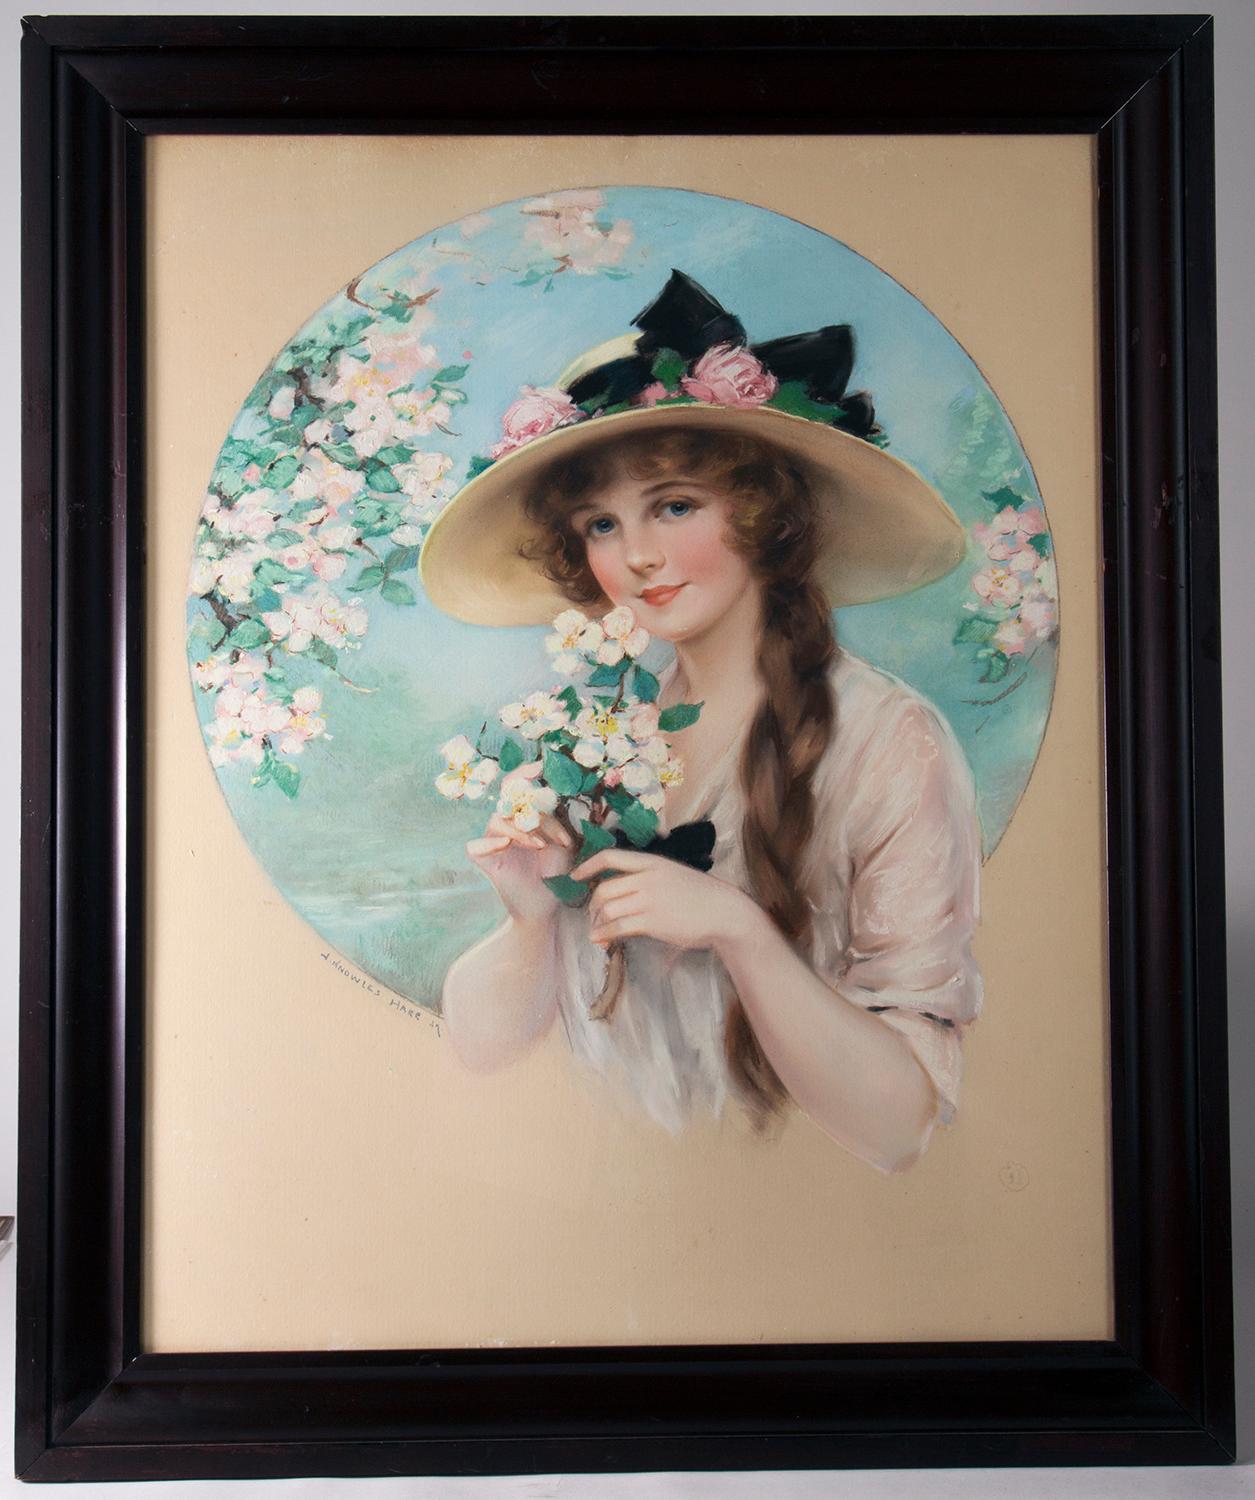 The Sunshine Girl - Spring - Painting by John Knowles Hare